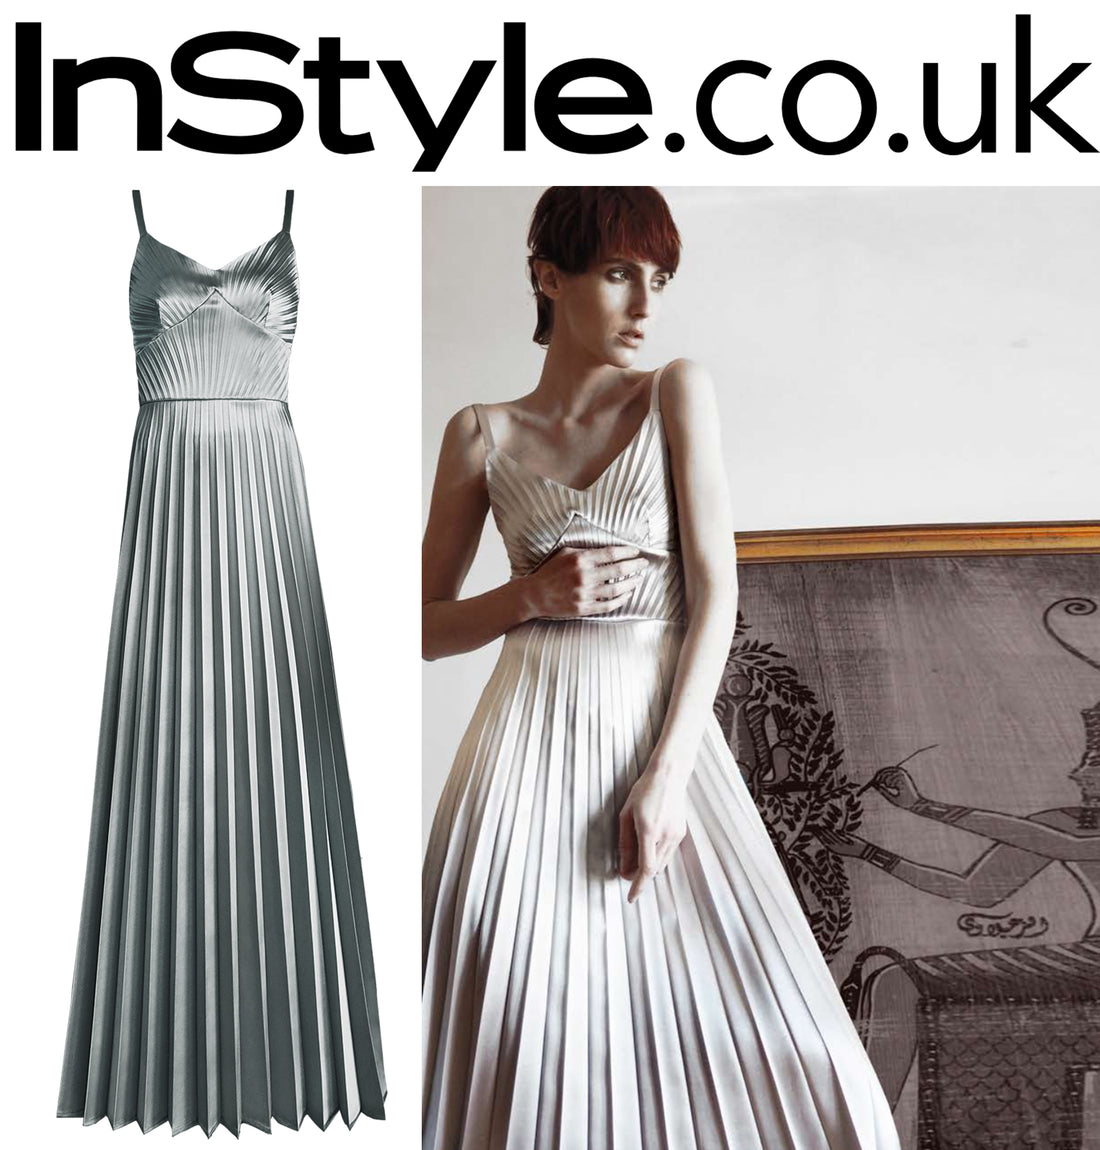 Mercury Dress named This Year's Party Dress - InStyle.co.uk